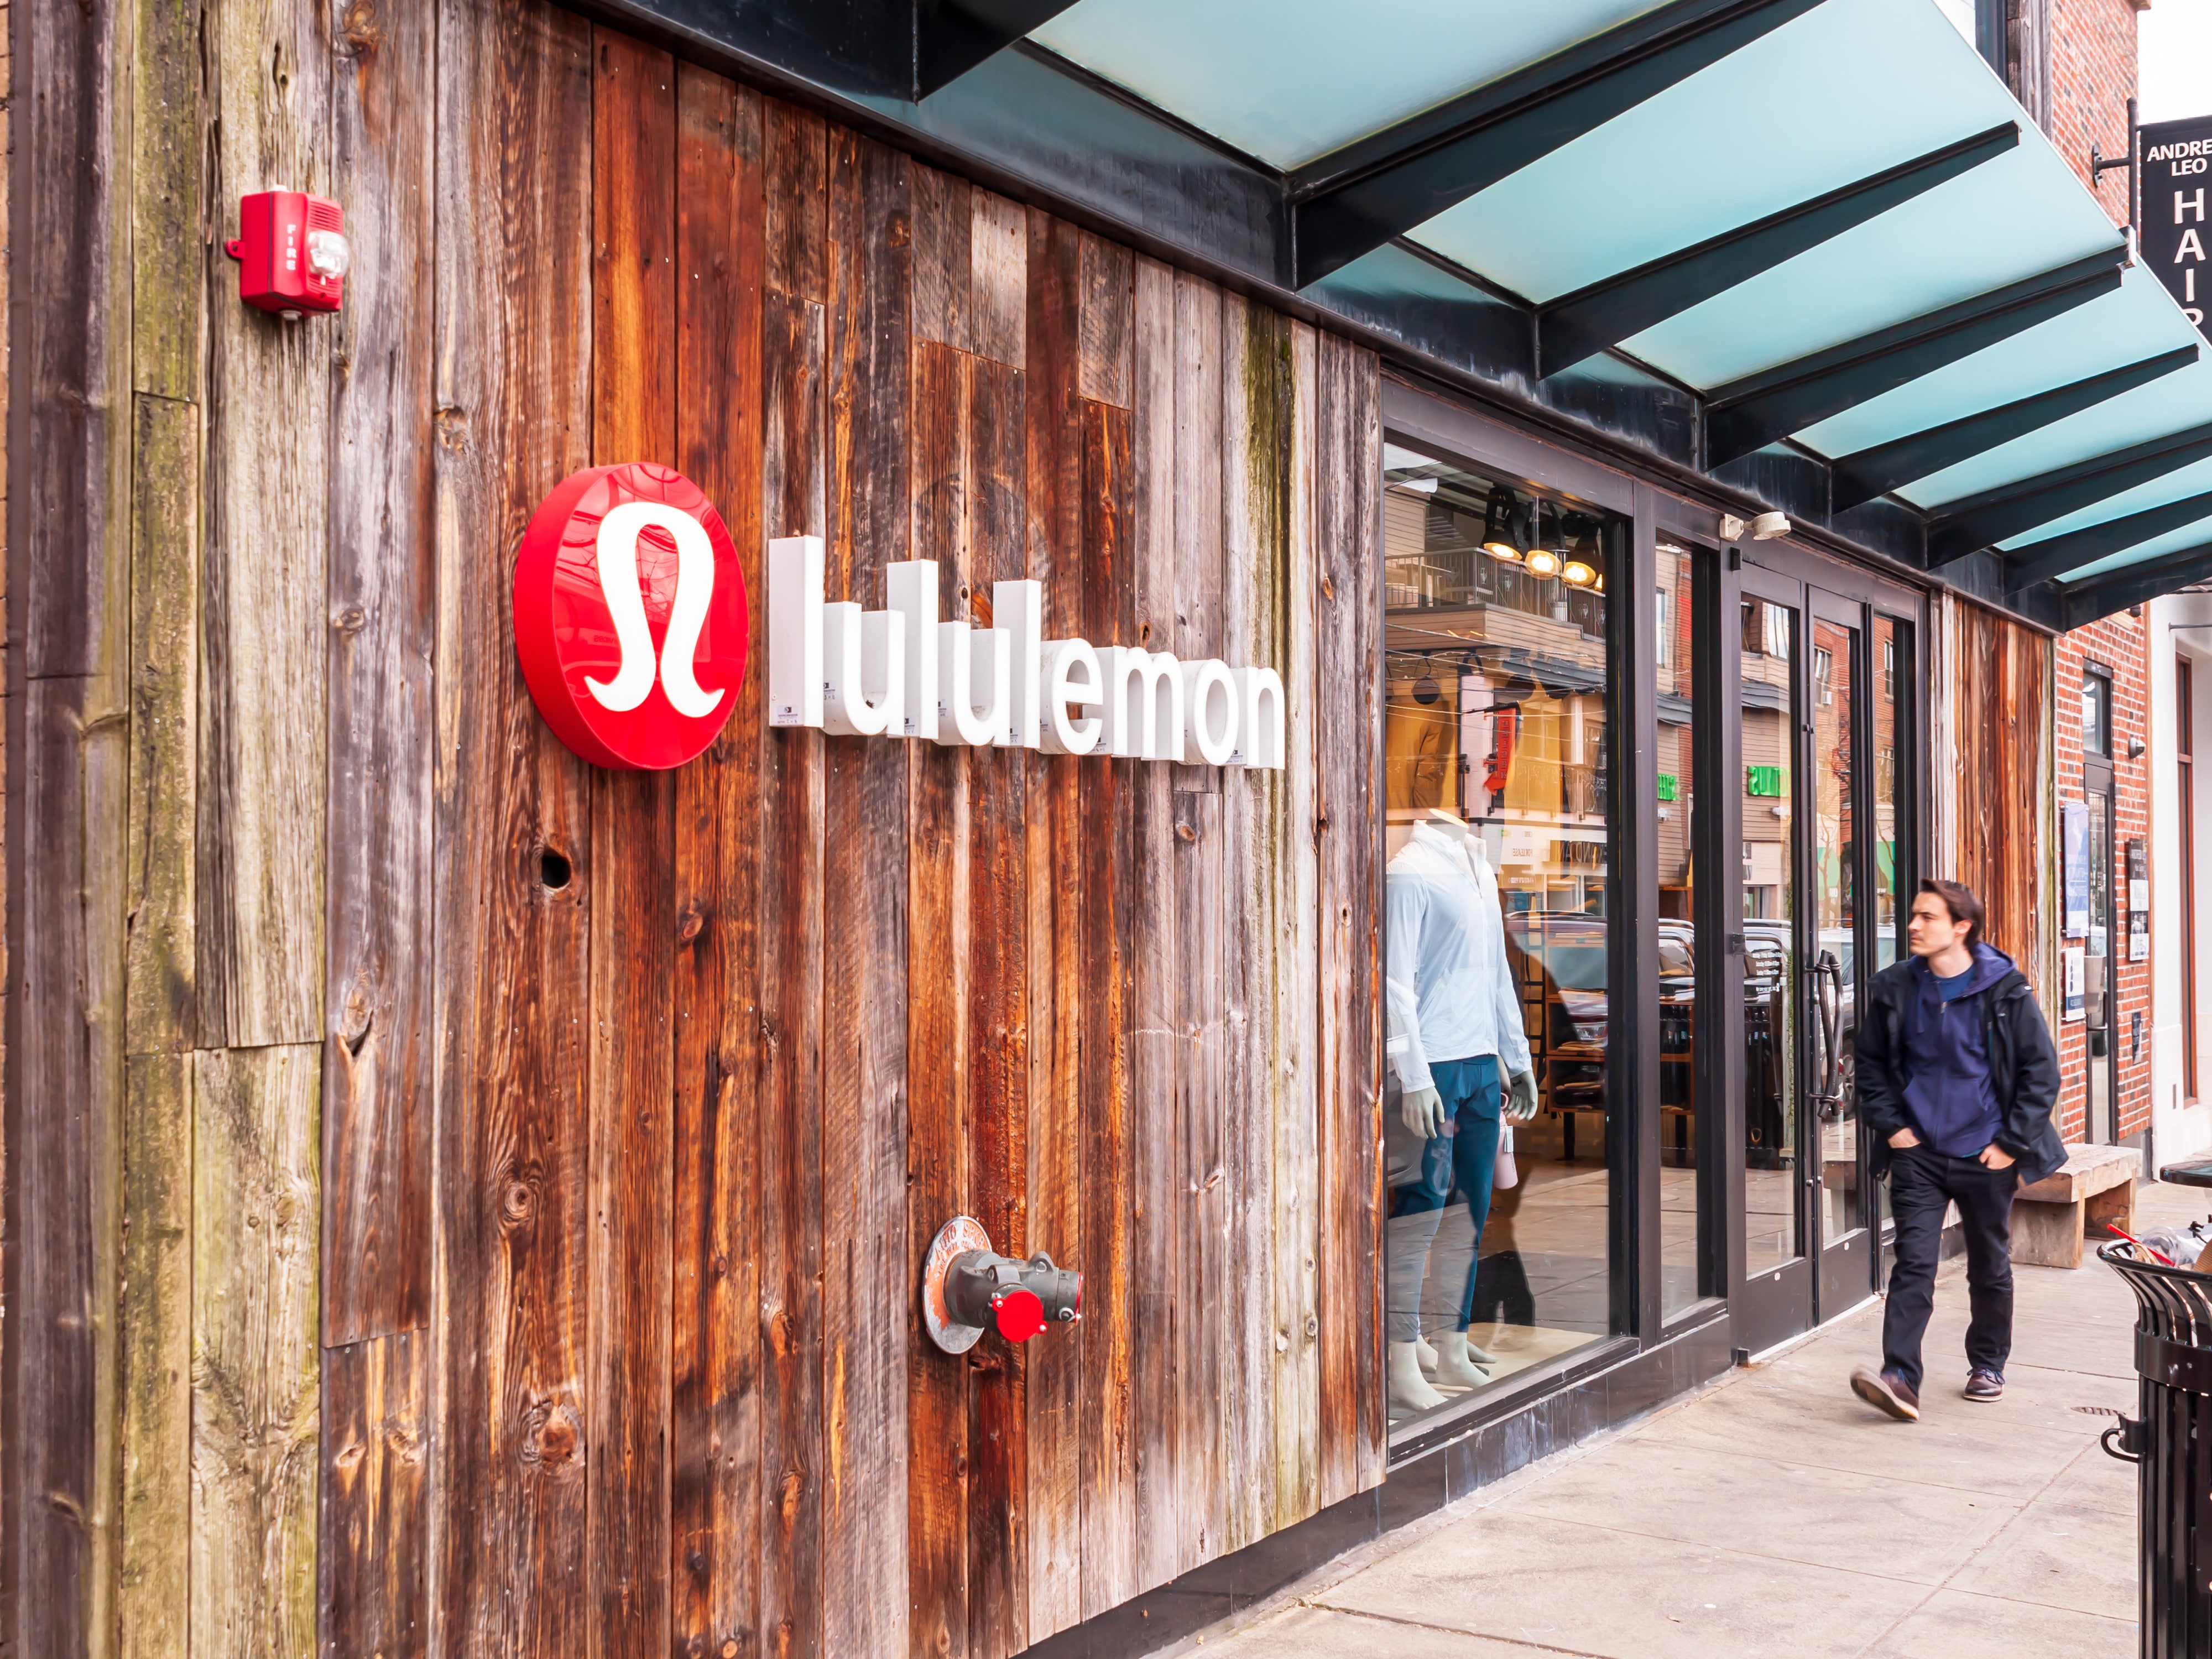 Lululemon Stock: Now Is Not The Time To Be Taking A Position (NASDAQ:LULU)